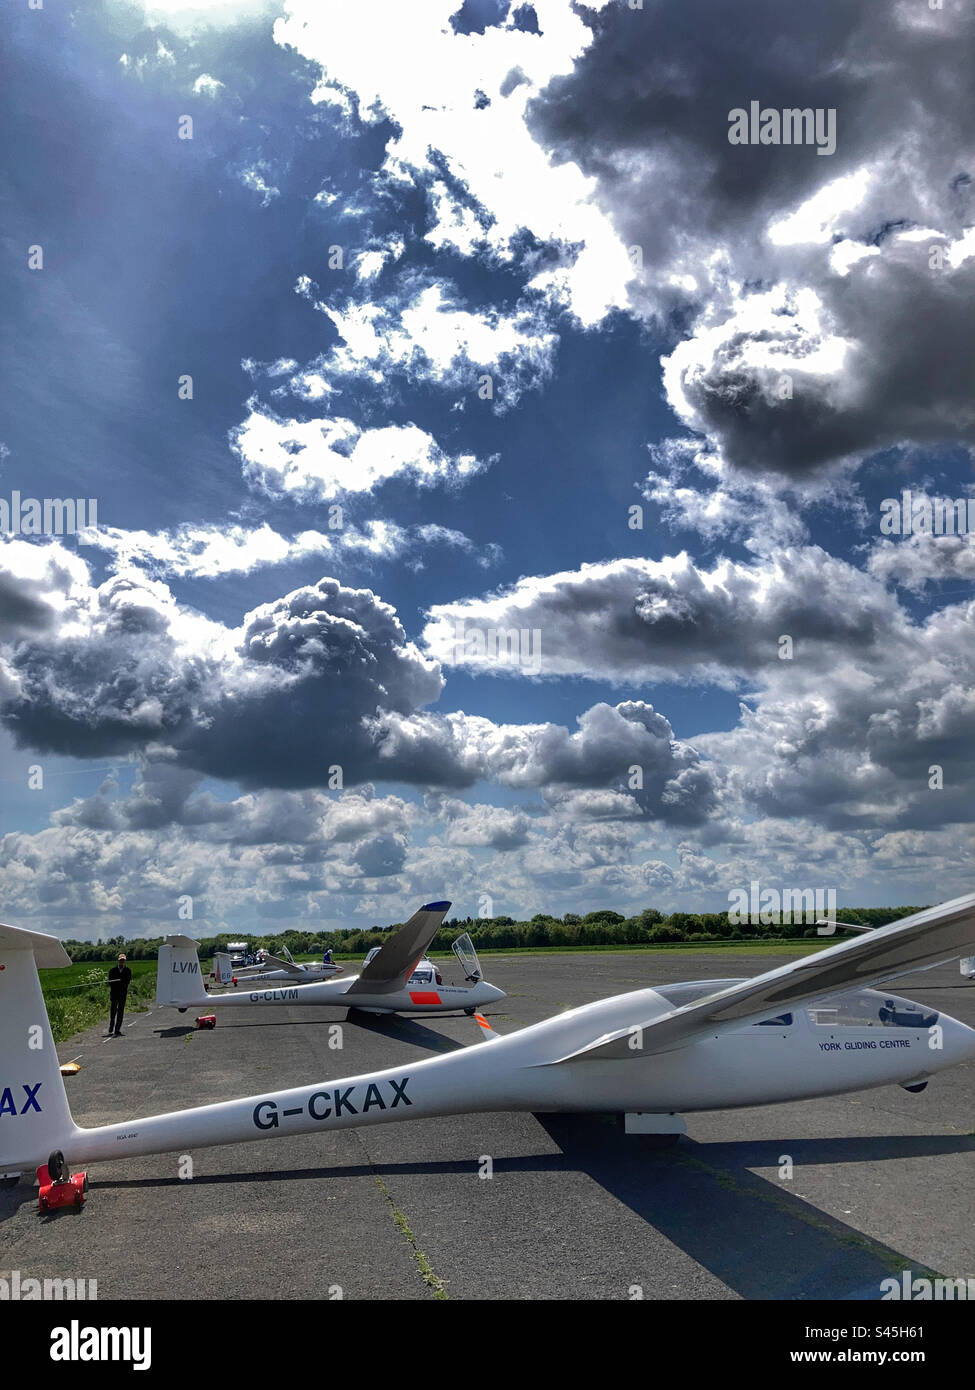 Gliders lined up at York Gliding Centre Rufforth Yorkshire Stock Photo